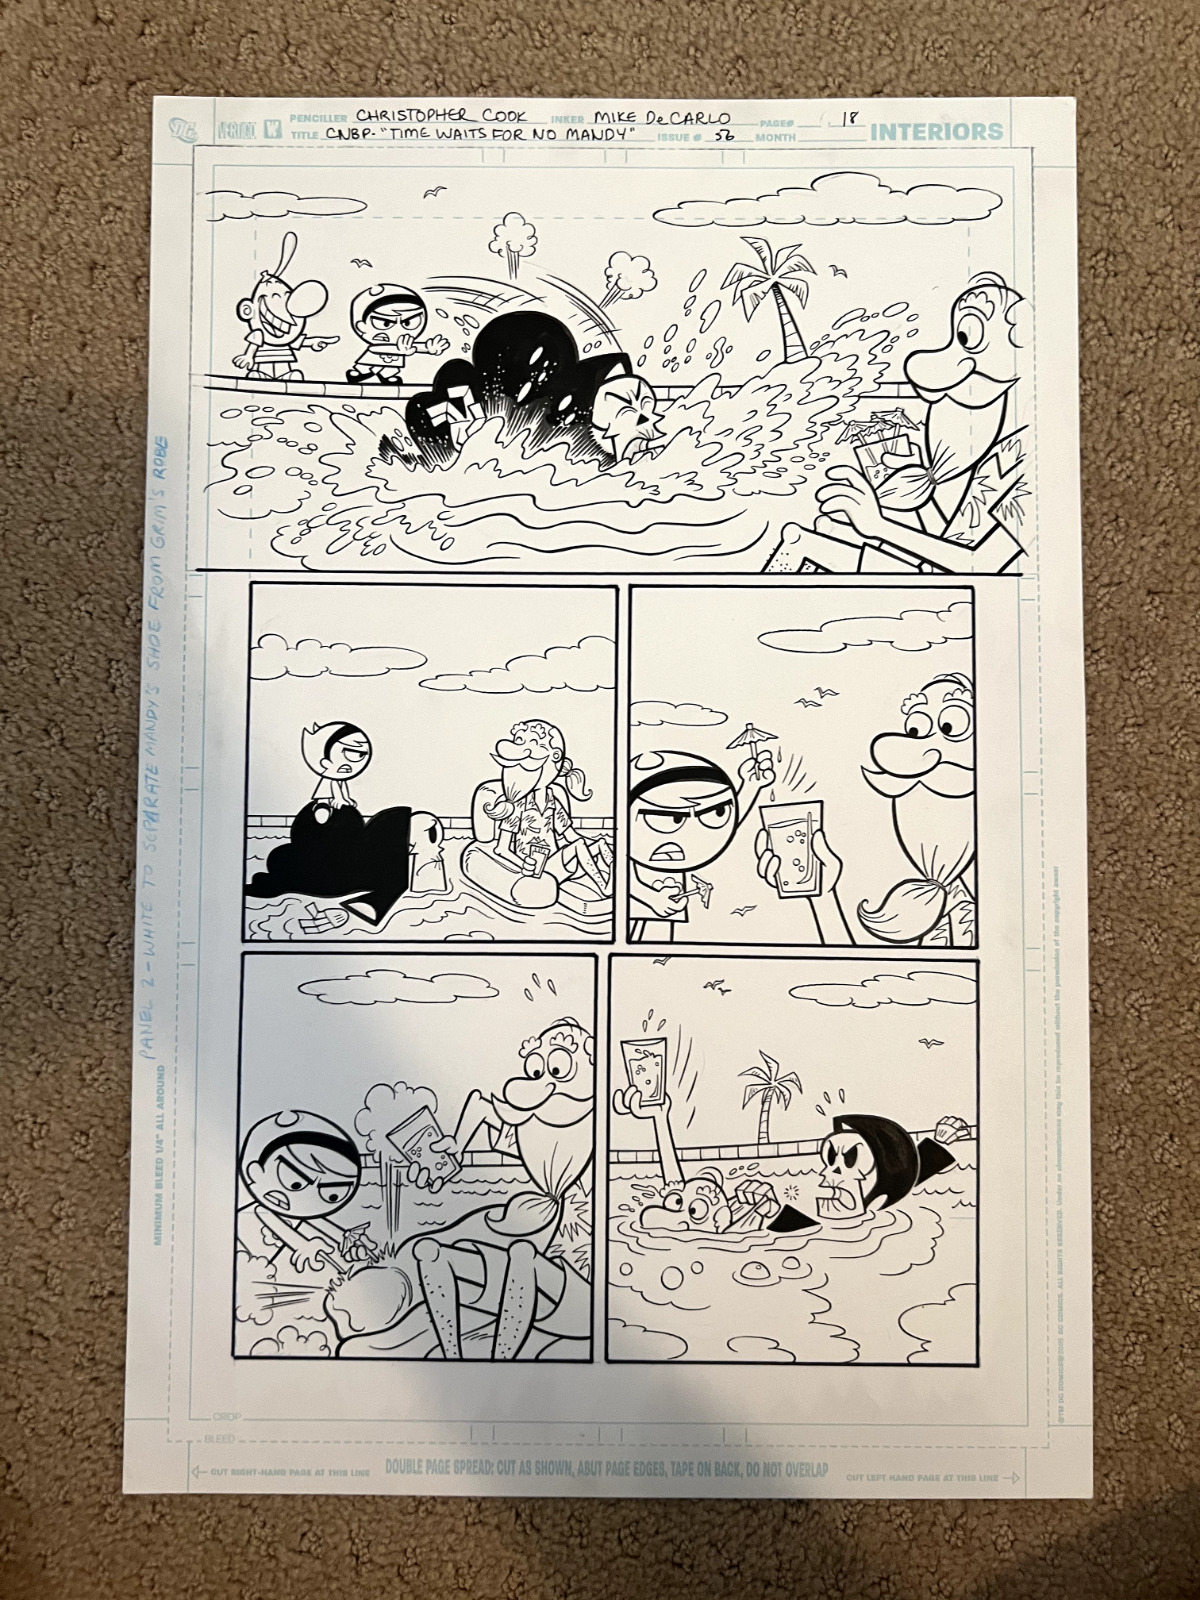 Billy & Mandy Issue 56 Page 18 Original Comic Art Page Chris Cook Mike DeCarlo